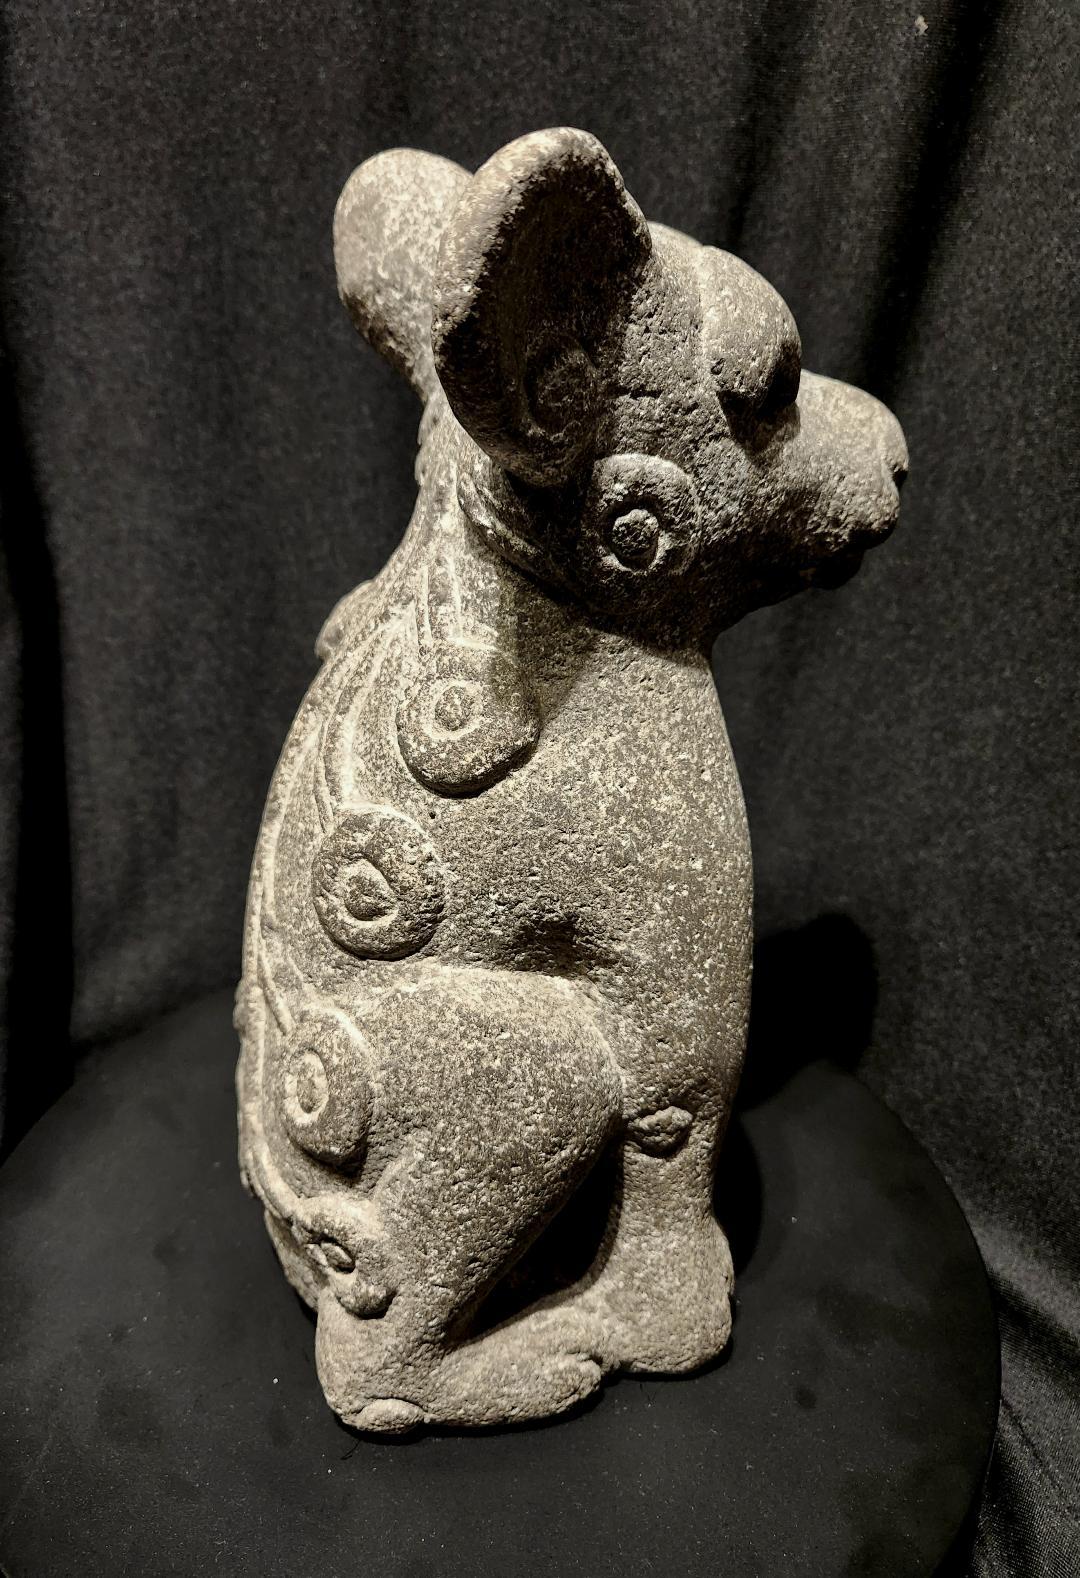 An Aztec Stone Sculpture of a dog-like creature, seated with one raised paw, having large round ears, deep set eyes, mouth with exposed upper fangs, and an unusual curved tail with circular attachments.

This is an Aztec Water Dog, which is a